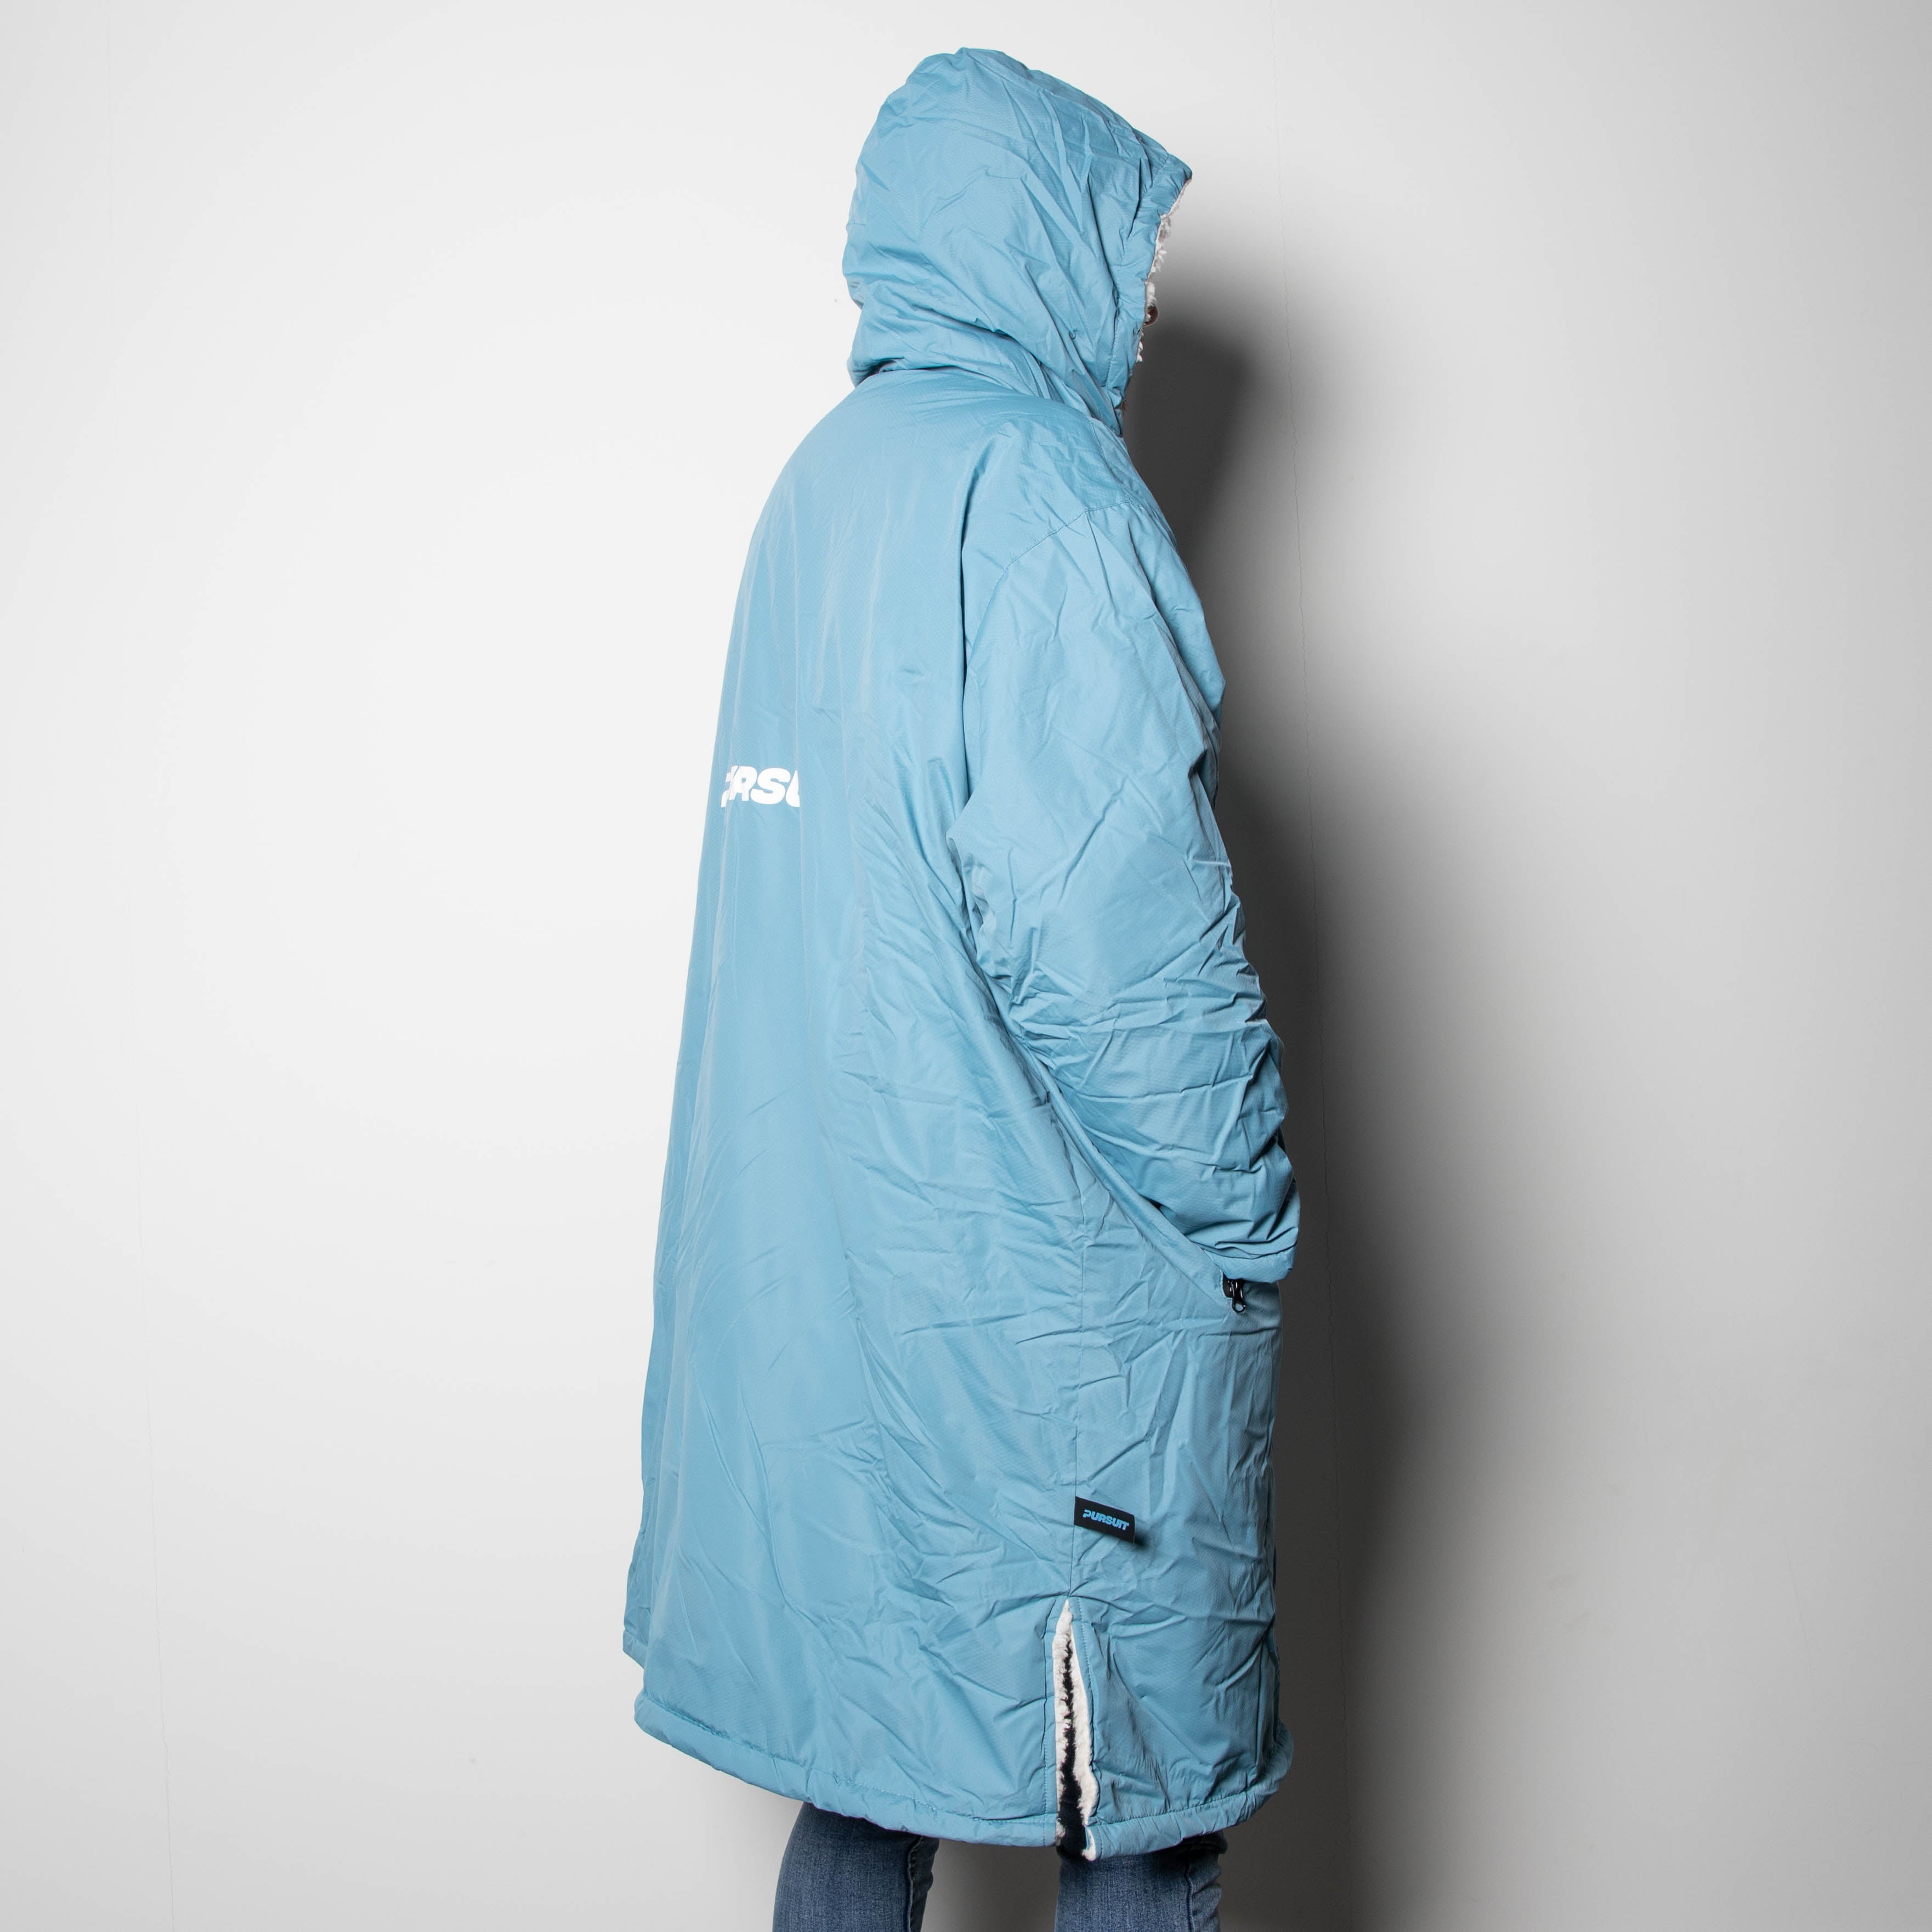 Oversized Adult Waterproof Active Dry Robe with Fleece Lining and Travel Bag in Light Blue